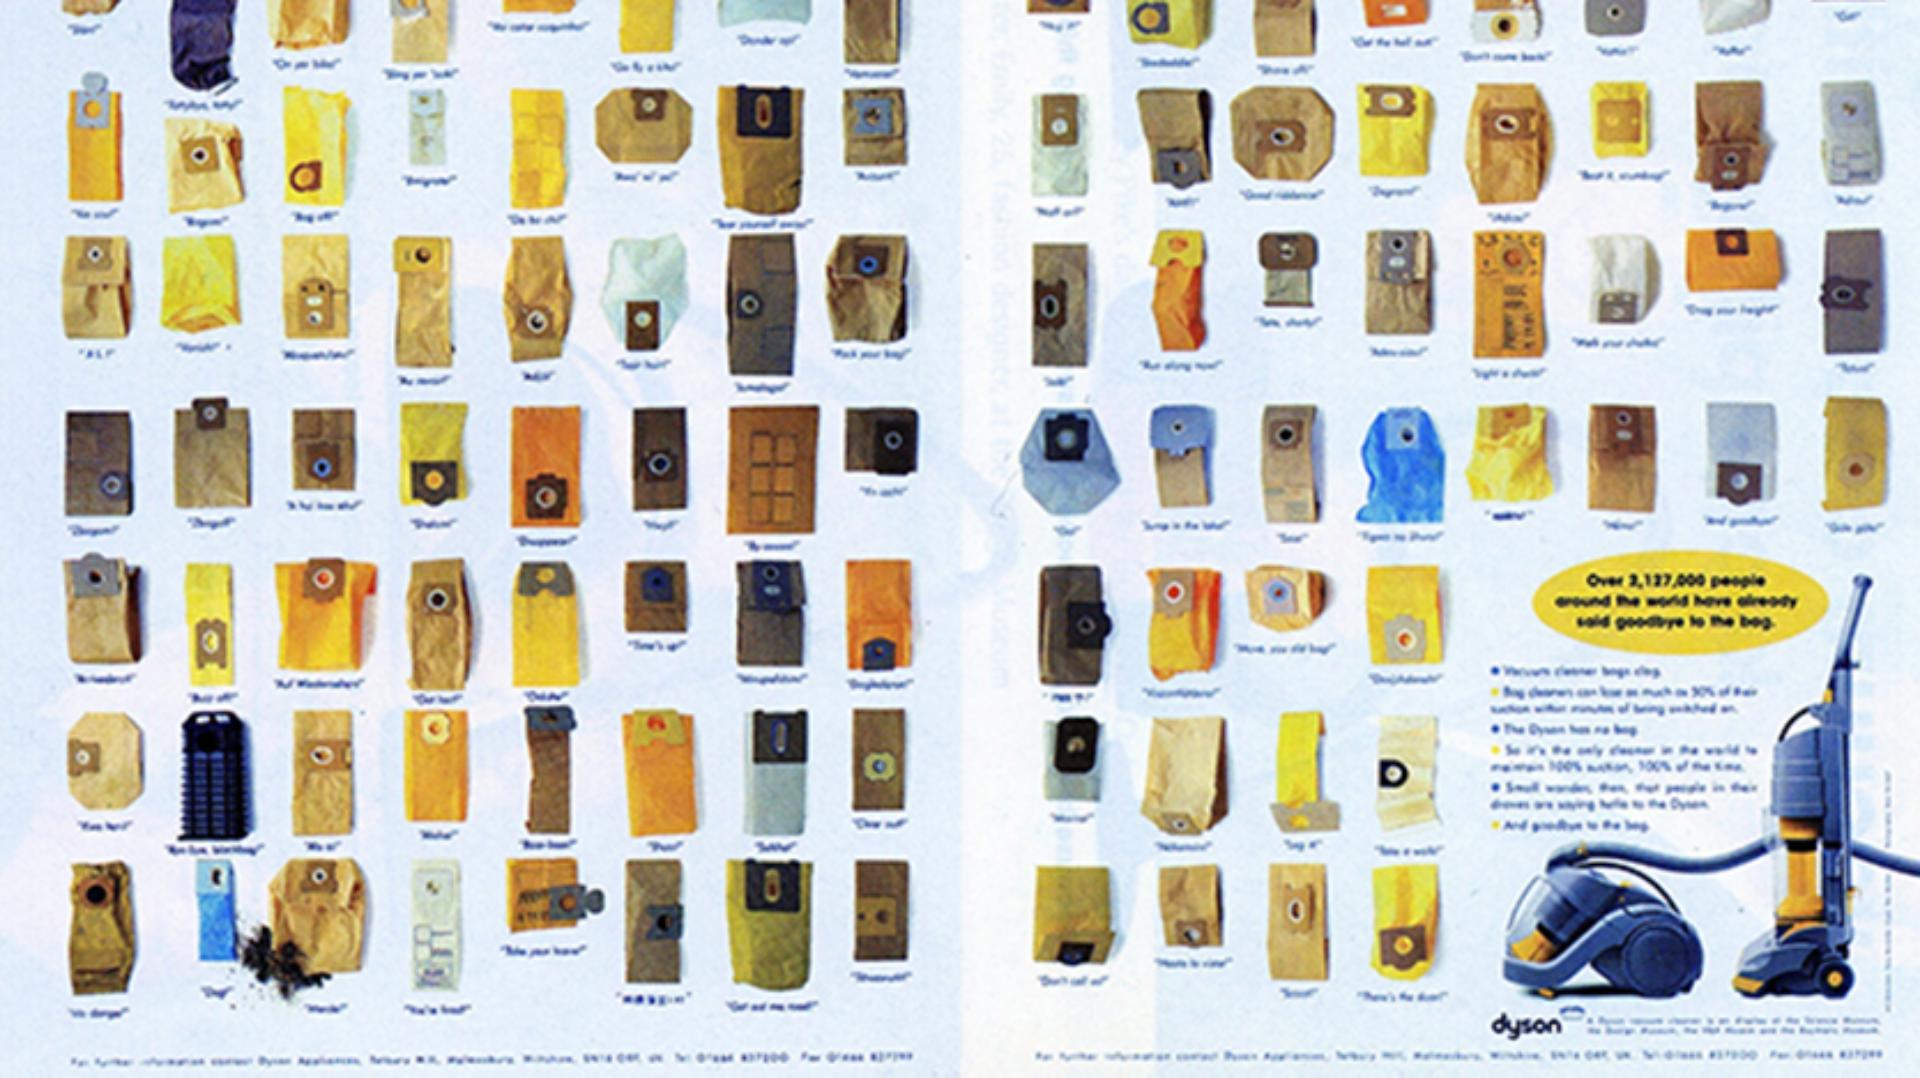 A print advert for DC01, showing rows and rows of vacuum bags